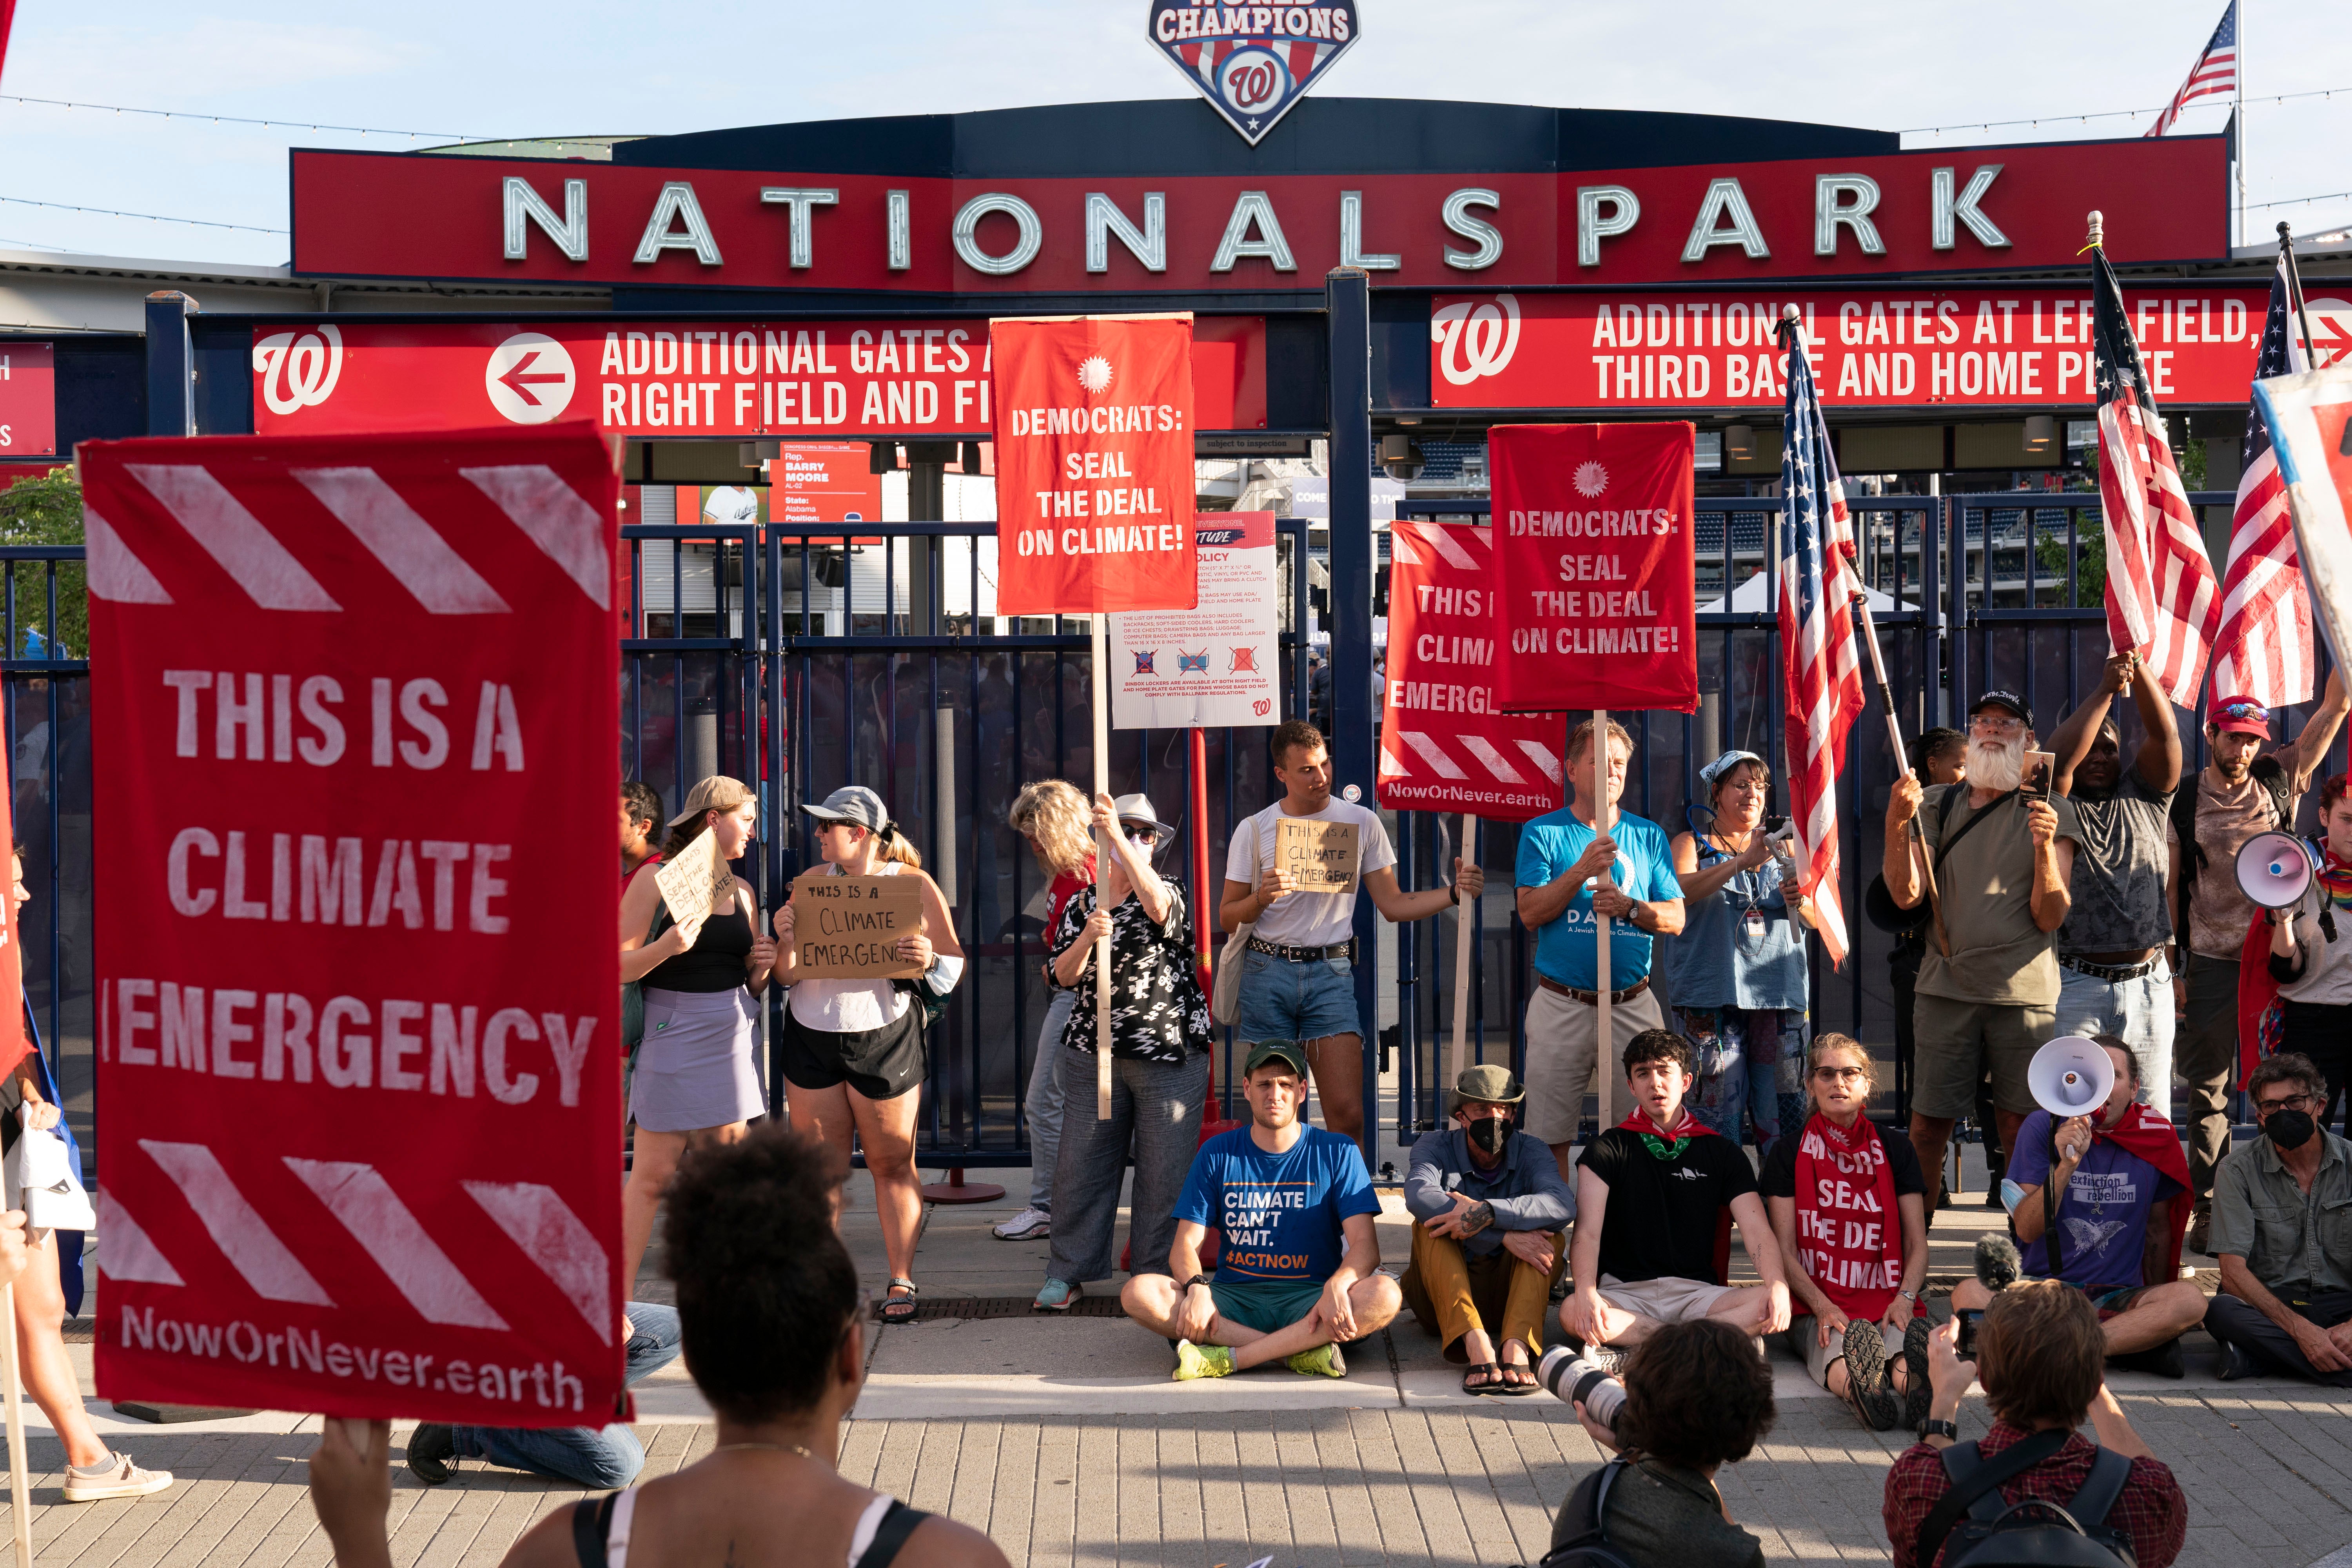 Climate activists protest outside Nationals Park and try to block an entry gate, where the annual Congressional Baseball Game for Charity is being held